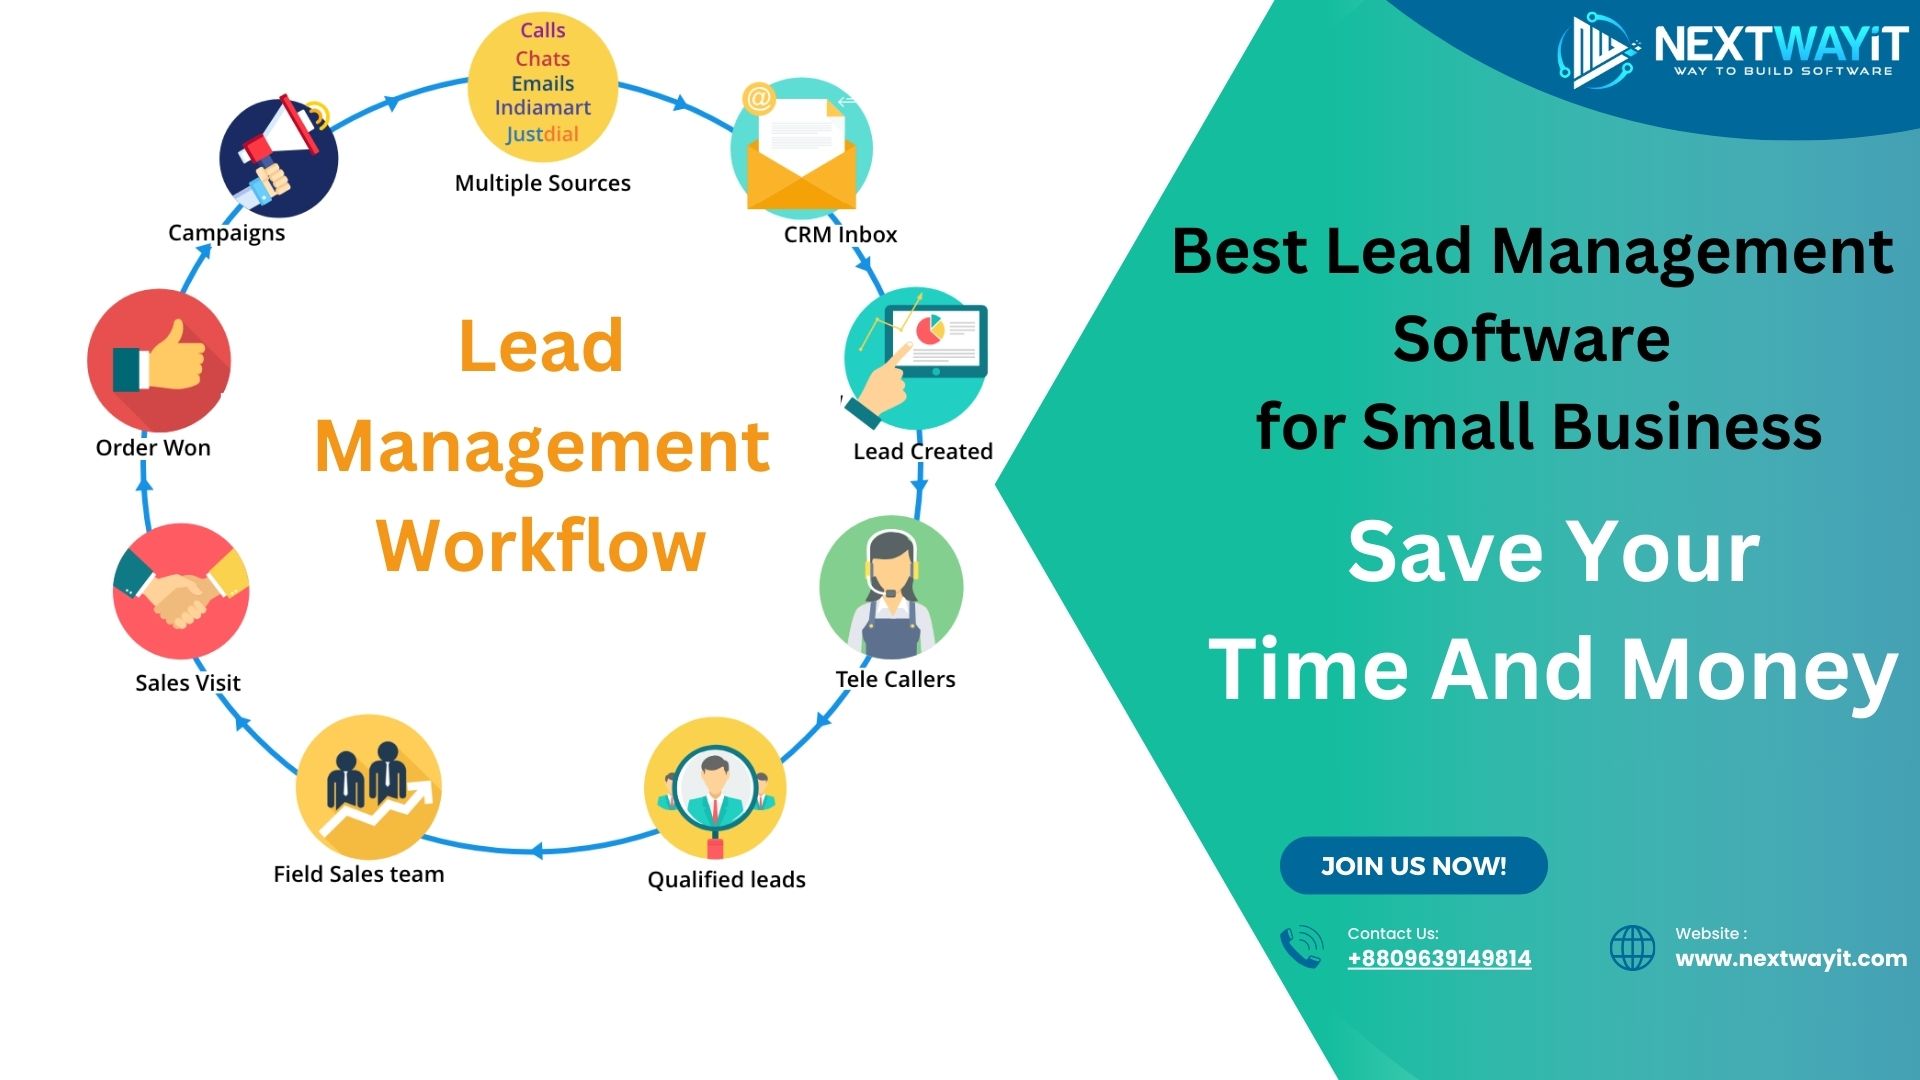 Lead Management Software for Small Businesses